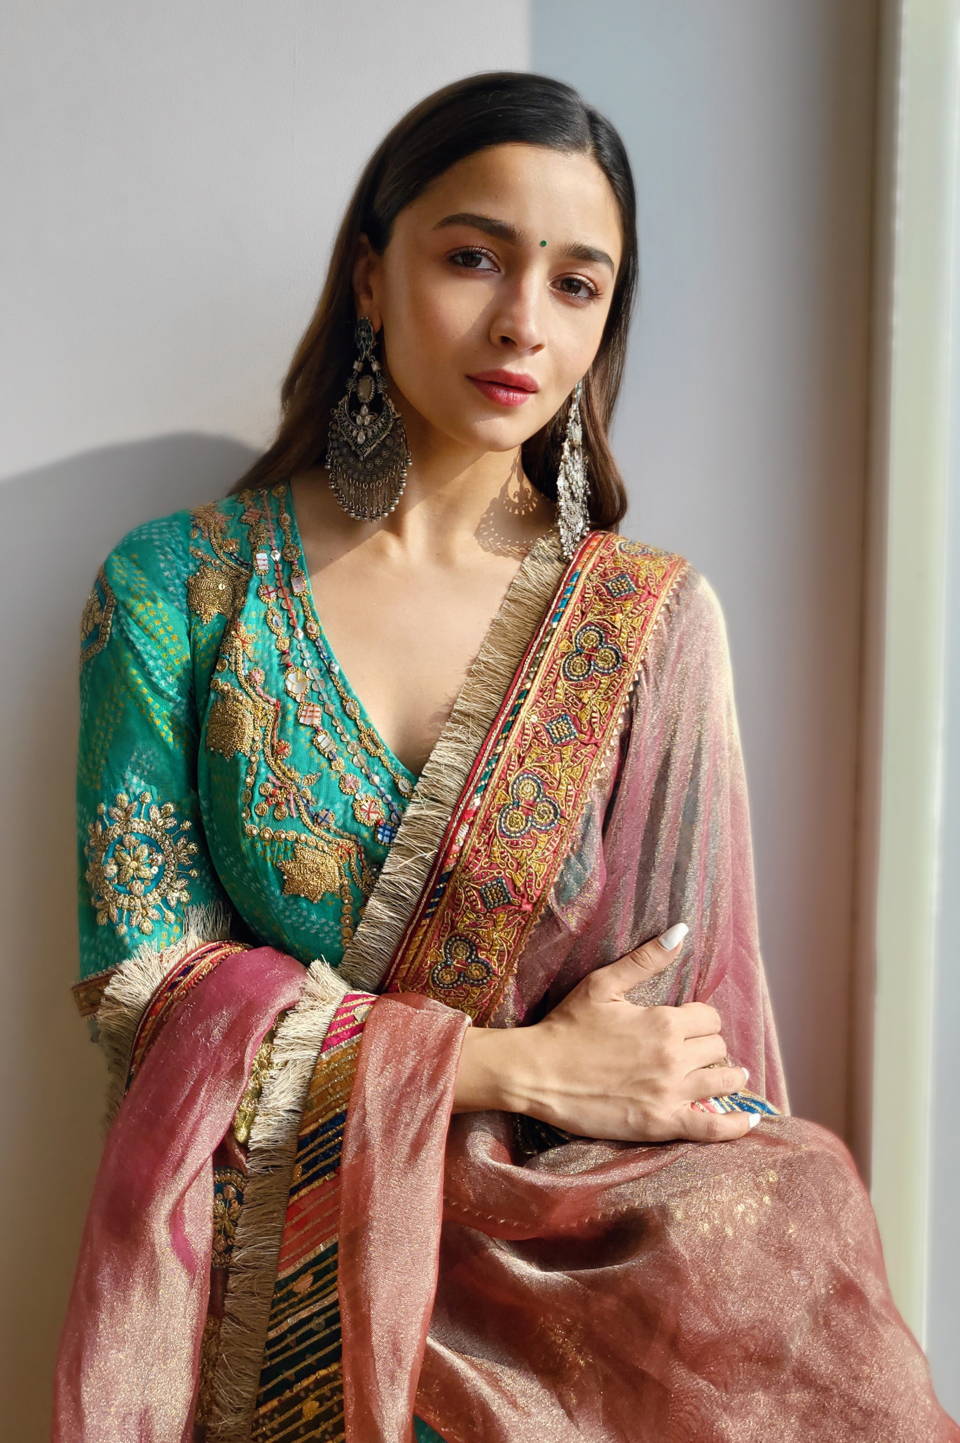 Alia Bhatt looks resplendent in the turquoise green outfit by Couturiers Rimple and Harpreet Narula